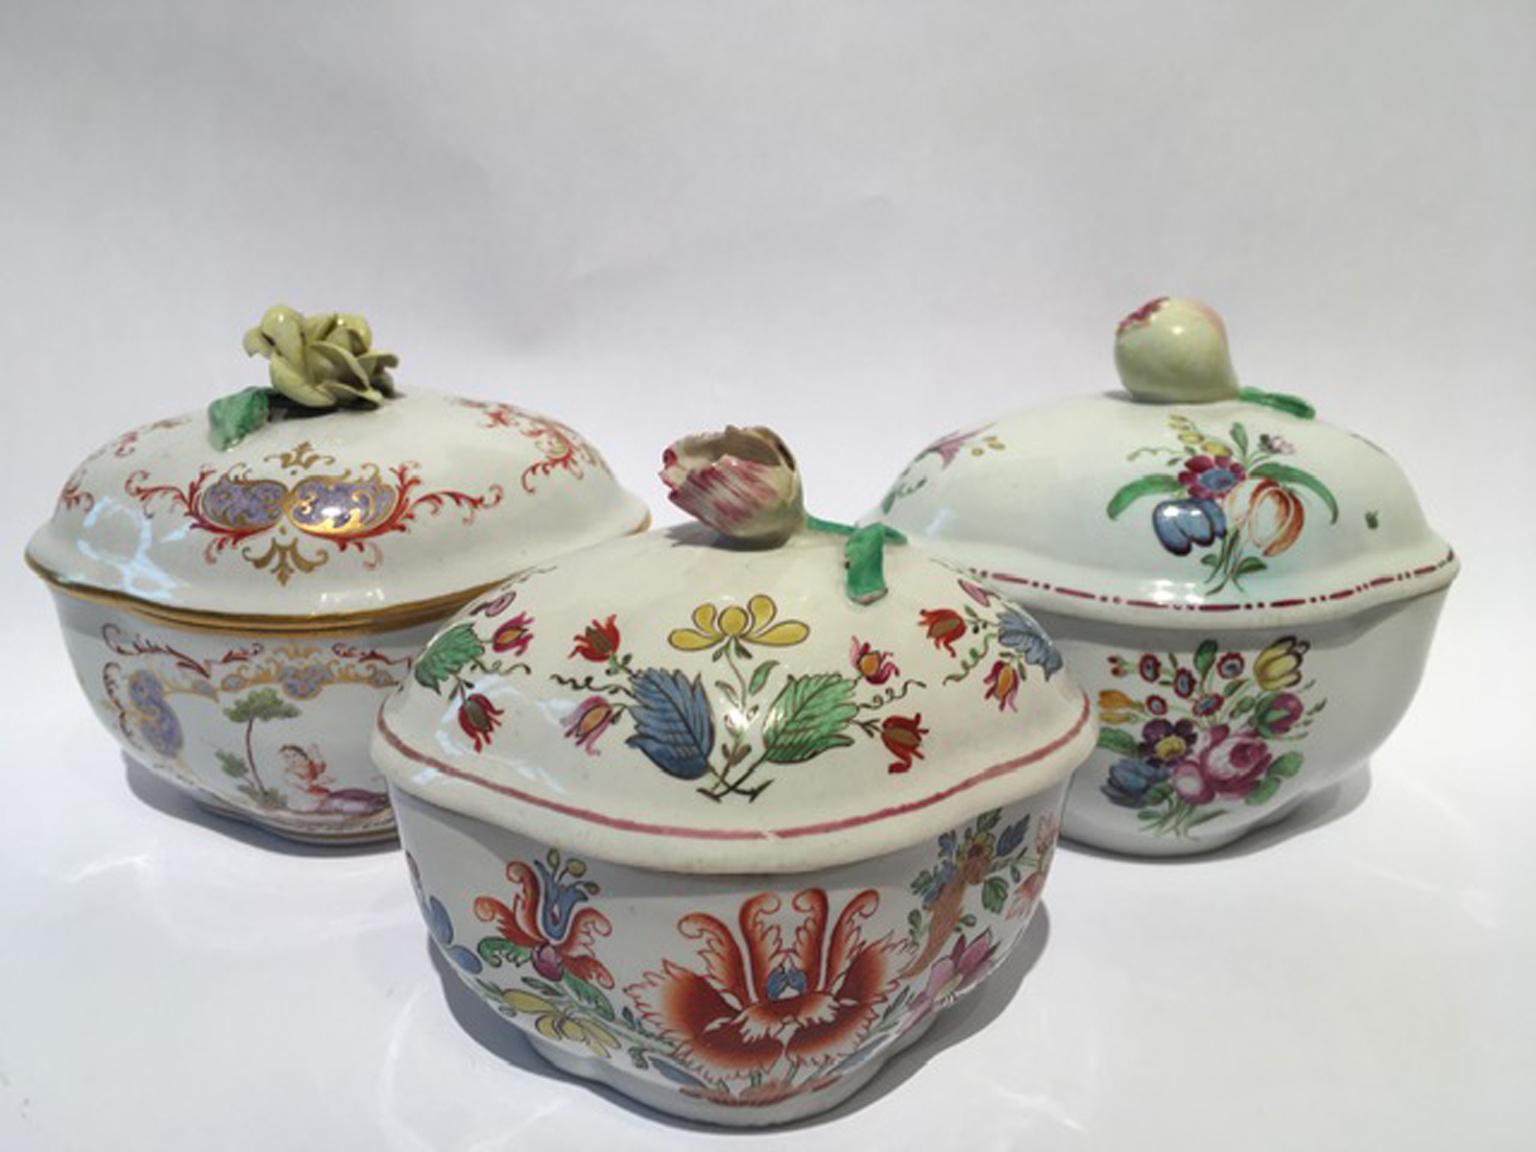 These sugar bowls are a little collection of interesting Italian porcelain pieces coming from the historical Richard Ginori factory, Doccia, Italy
One of them, has the tulip decor, one of the most wanted, the other sugar bowls are finely drawed,